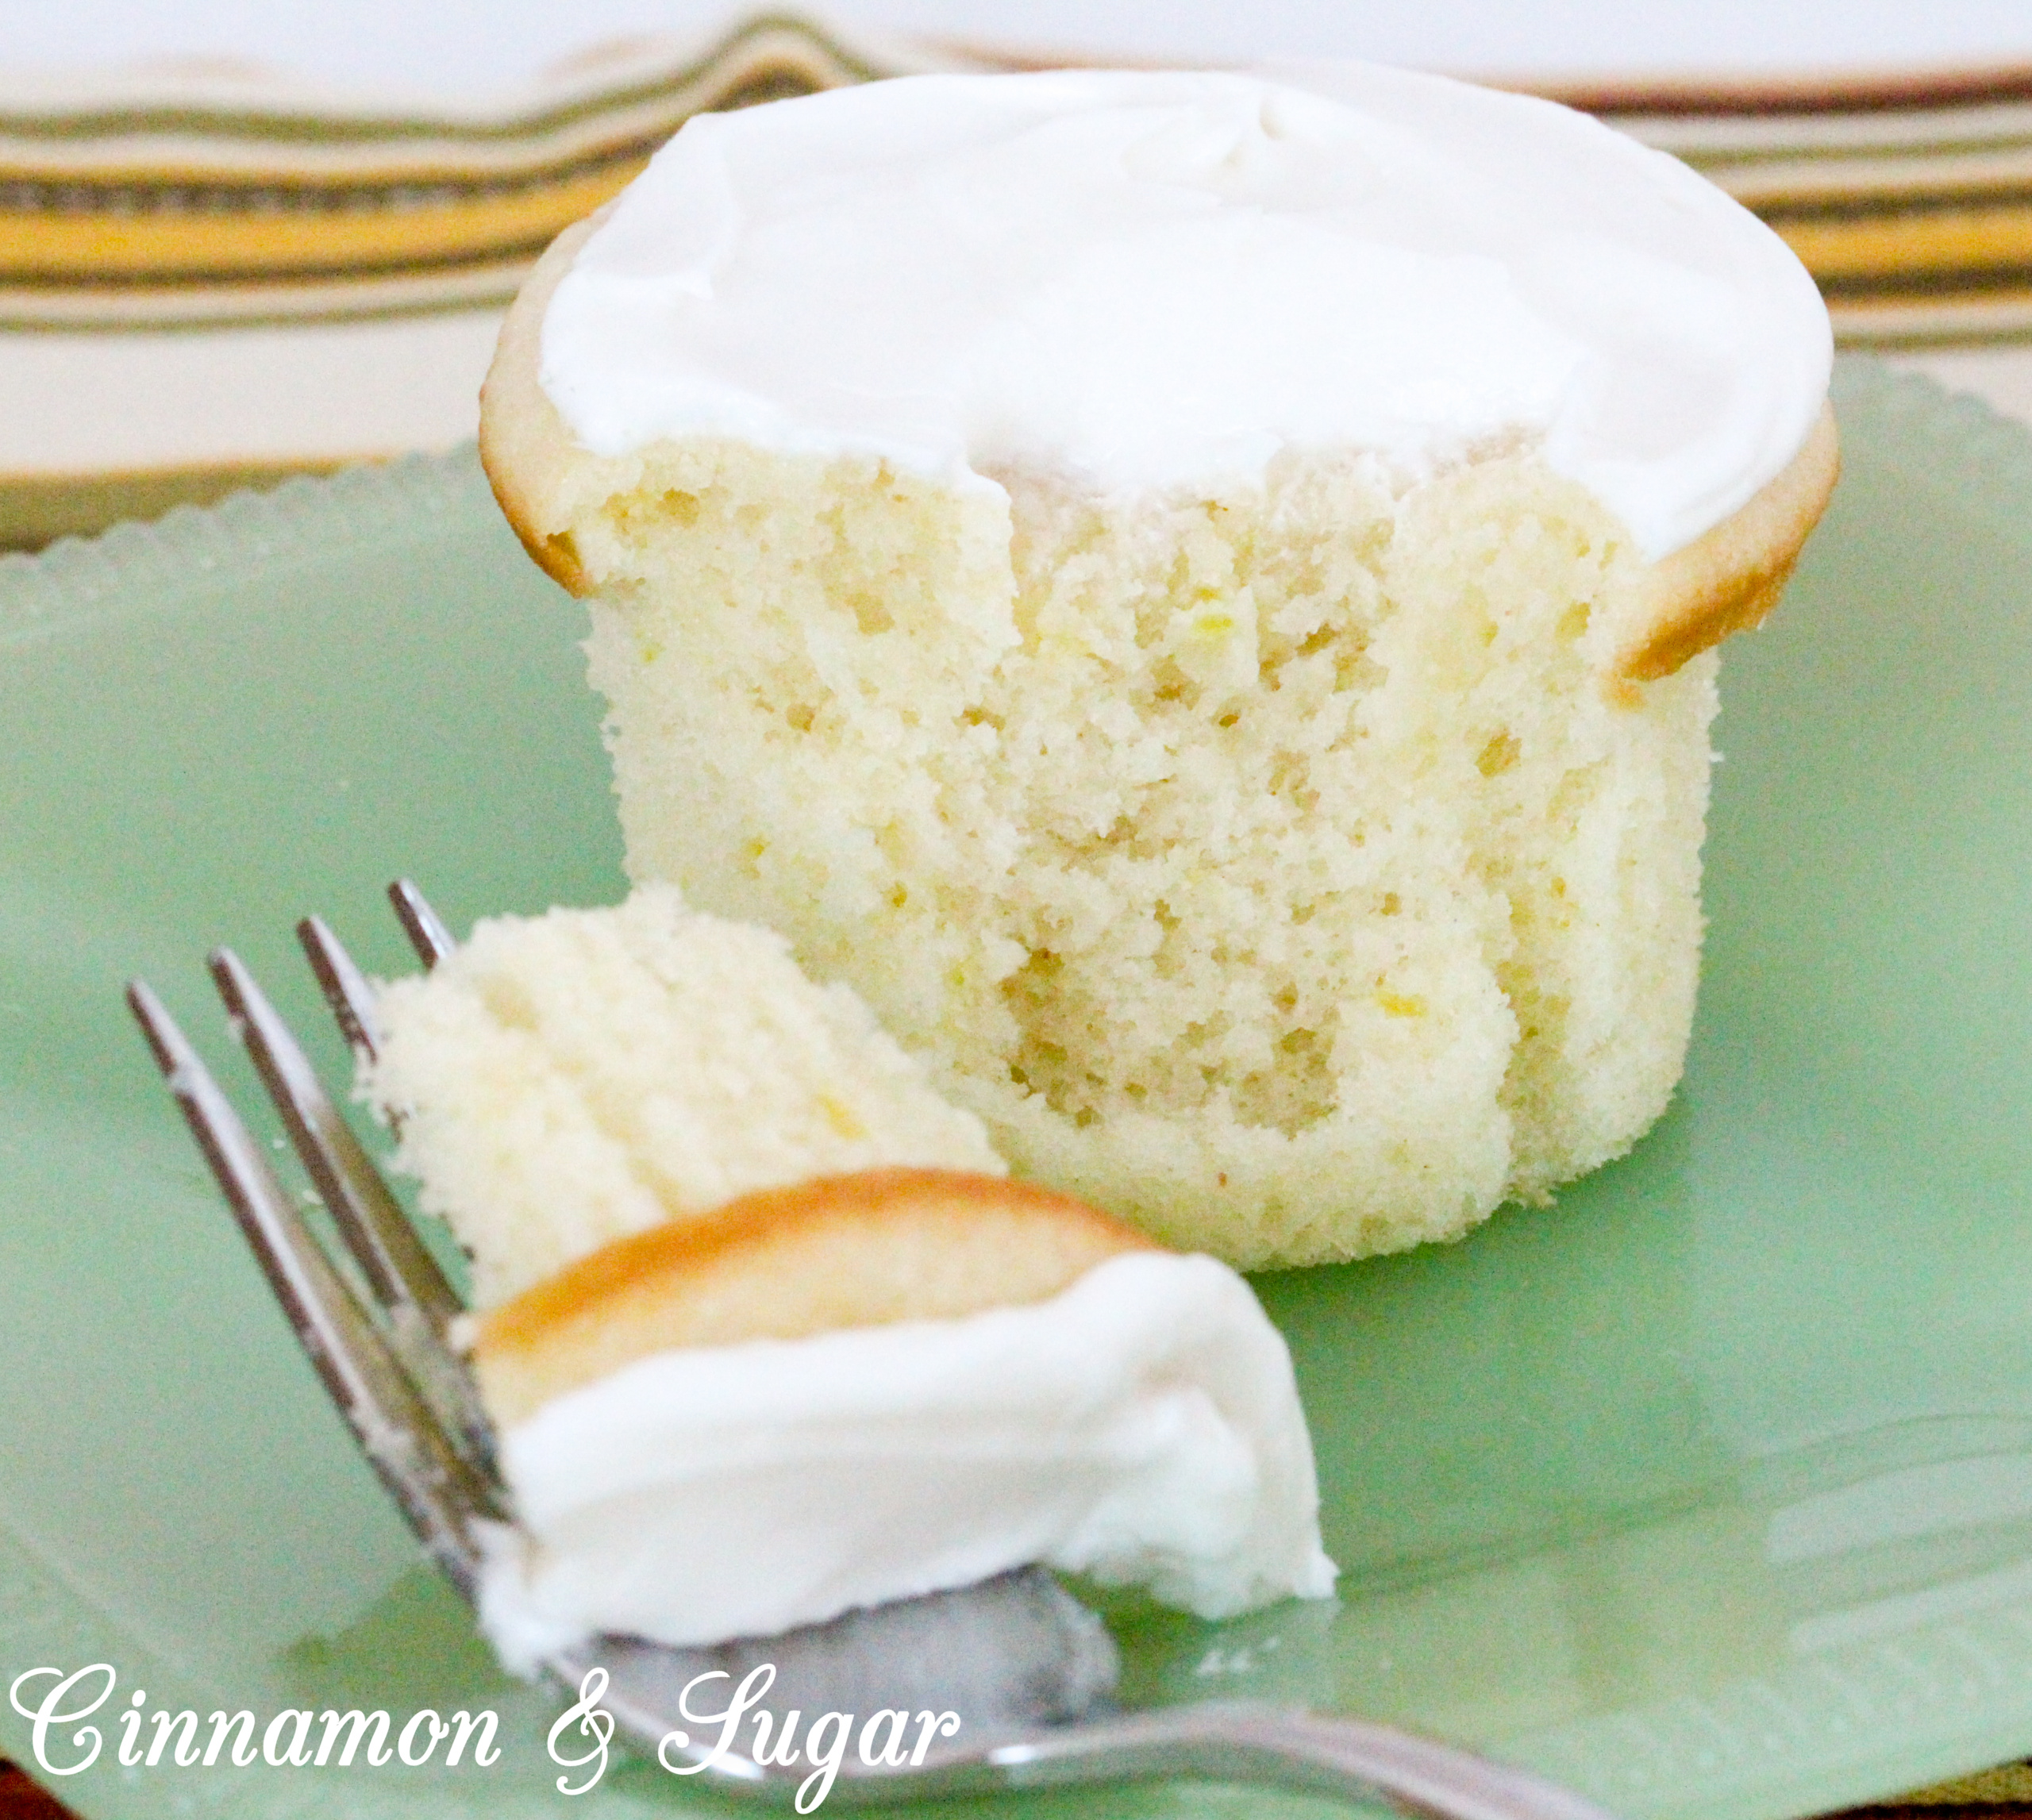 Lemony cream cheese frosting tops little lemon cakes that are super moist thanks to a generous dollop of sour cream. Perfect for afternoon tea or brunch! Recipe shared with permission granted by Maureen Klovers, author of MURDER IN THE MOONSHINE. 